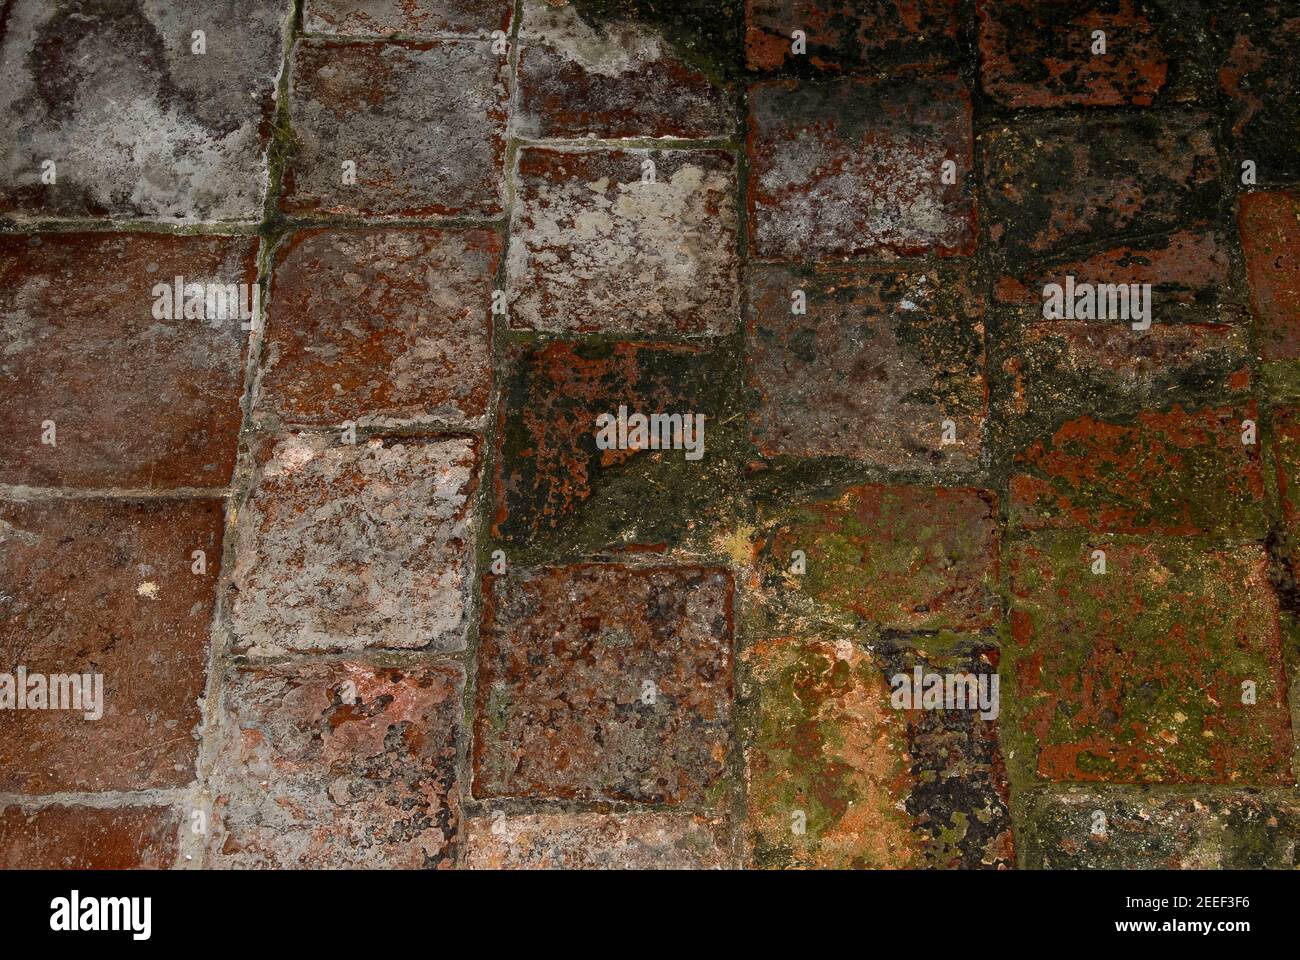 The effects of damp are all too obvious on the worn and damaged surfaces of these medieval encaustic tiles in the pavement of the mid-13th century Parish Church of Saint Augustine at Brookland, Kent, England, UK.  Although the church was built around 1250 on an artificial mound, the site stands in low-lying Walland Marsh, part of Romney Marsh with its dykes, ditches and fields often flooded in winter. Over the centuries, parts of the church have suffered from damp and subsidence, with walls leaning well out of true. Stock Photo